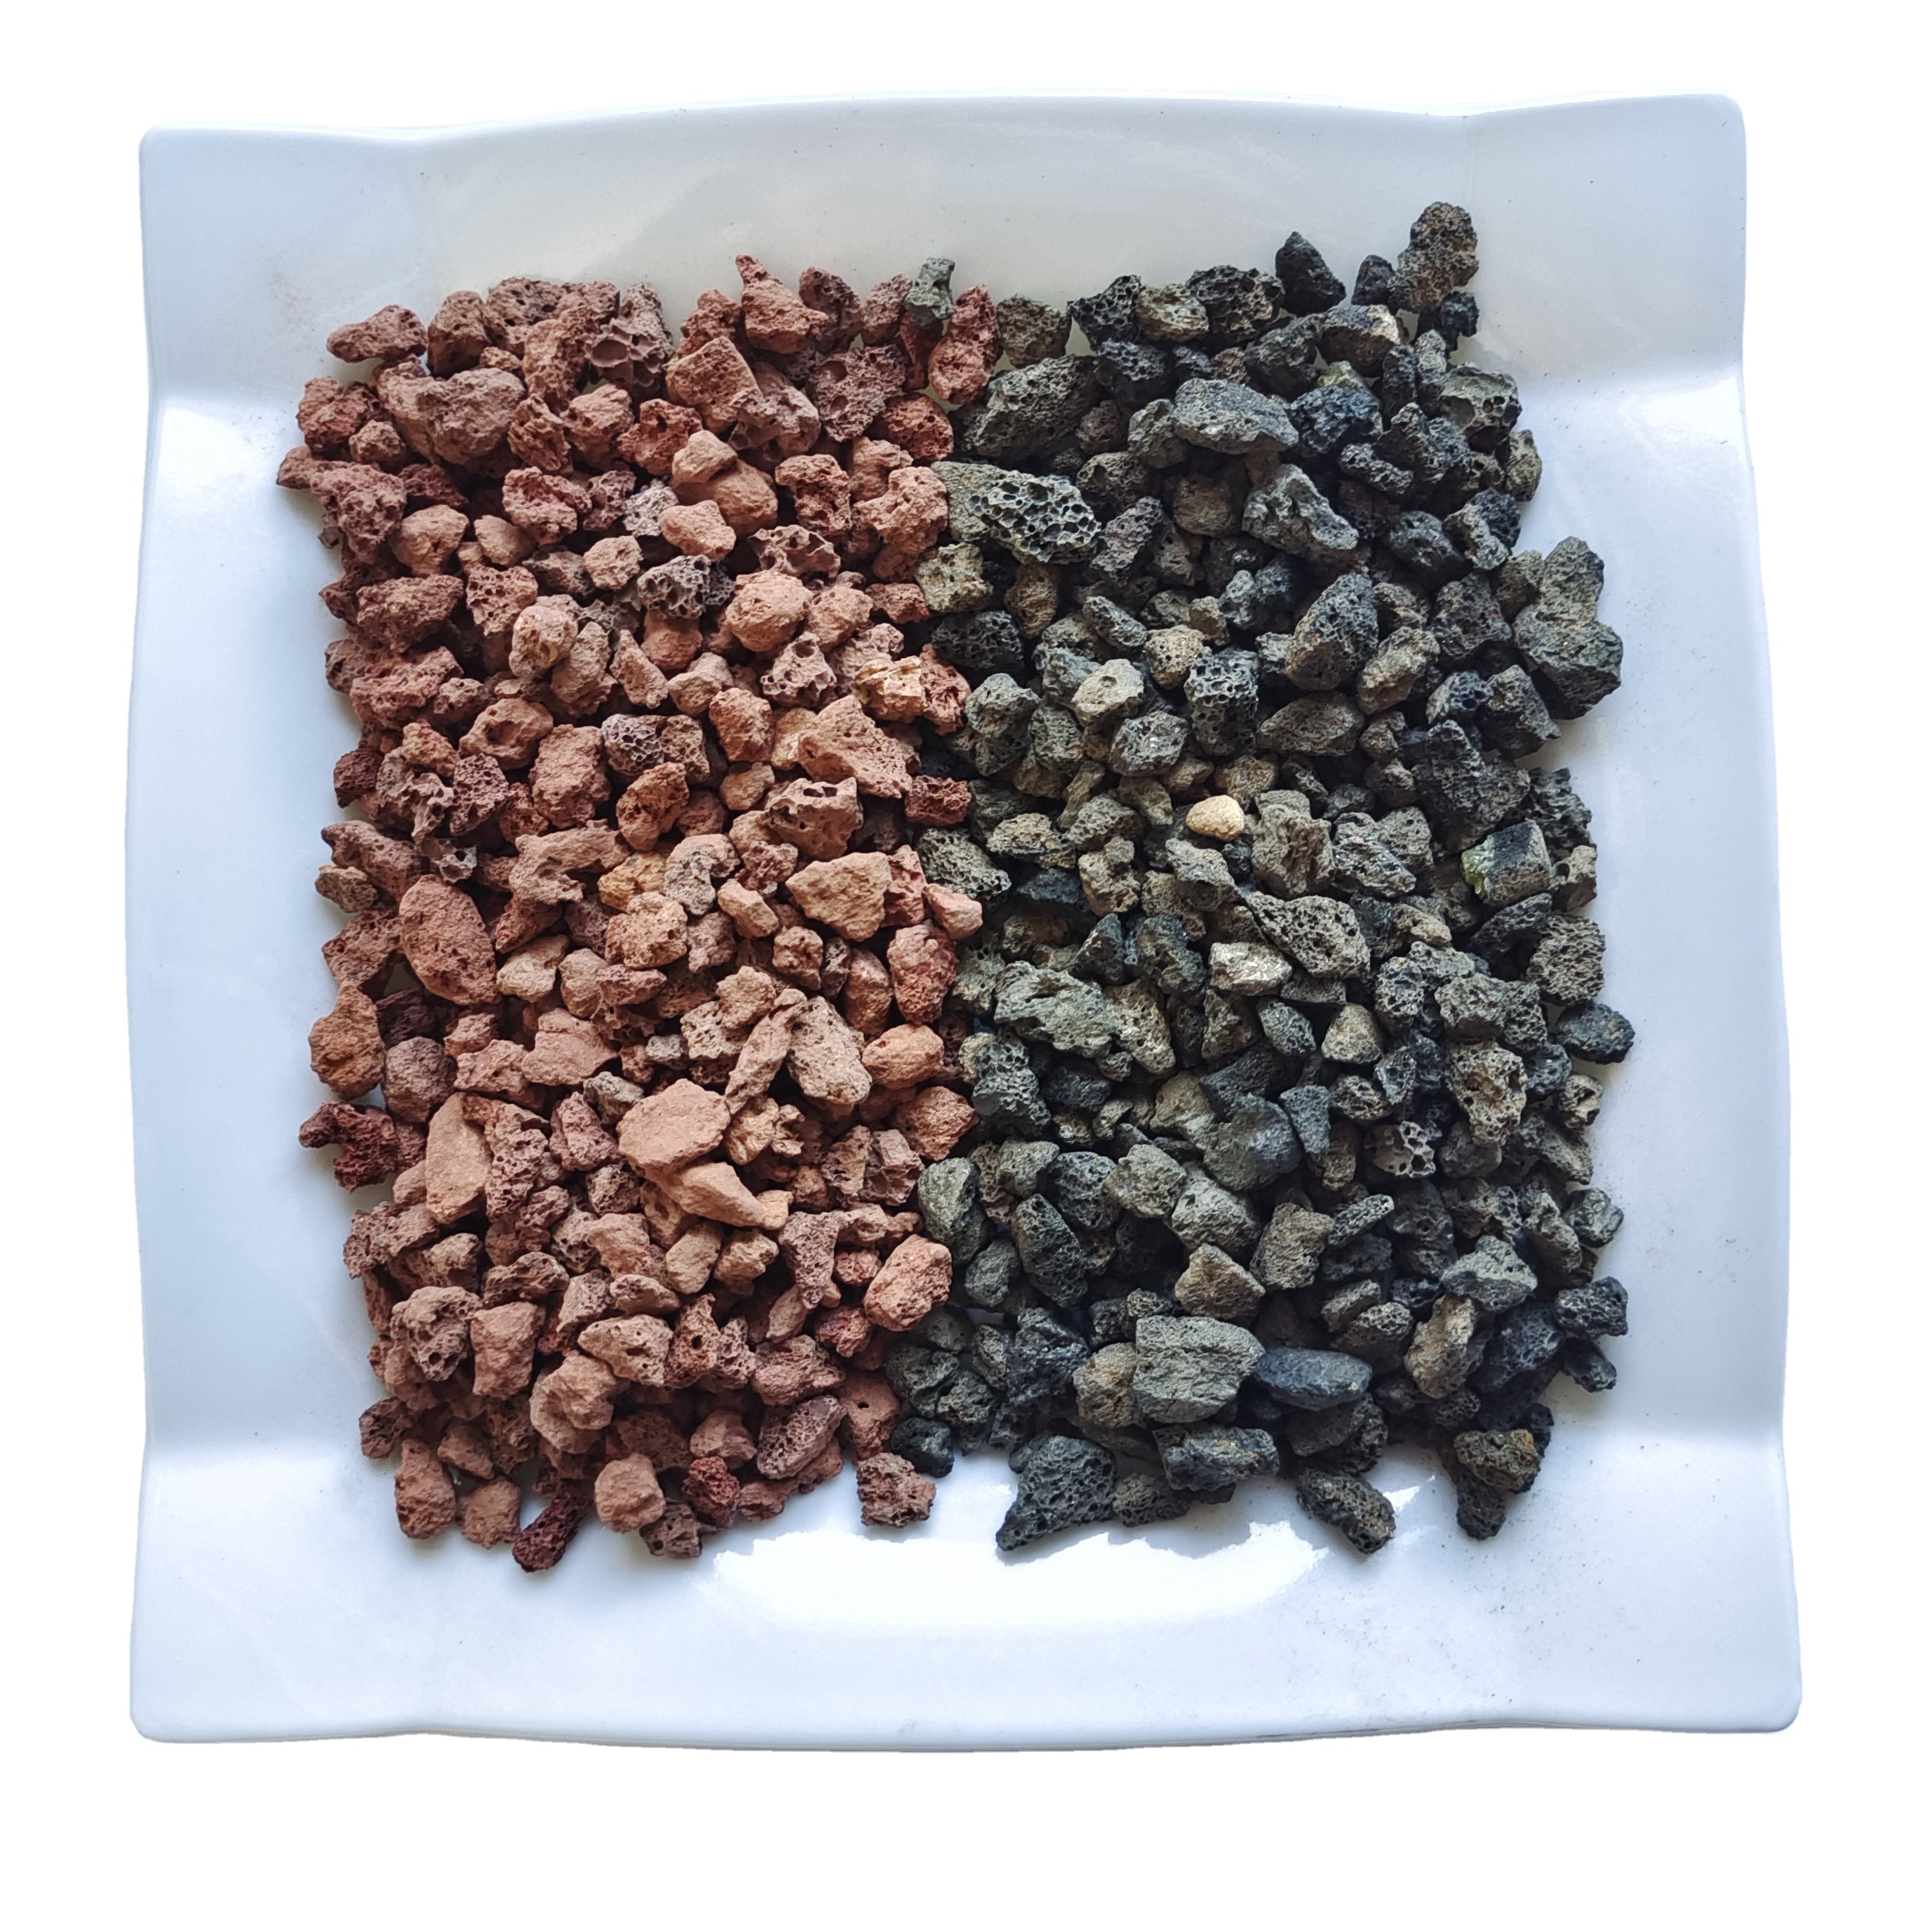 Wholesale 1-3mm Volcanic Stone lava Rock For Agriculture, Volcanic stone manufacturer from China